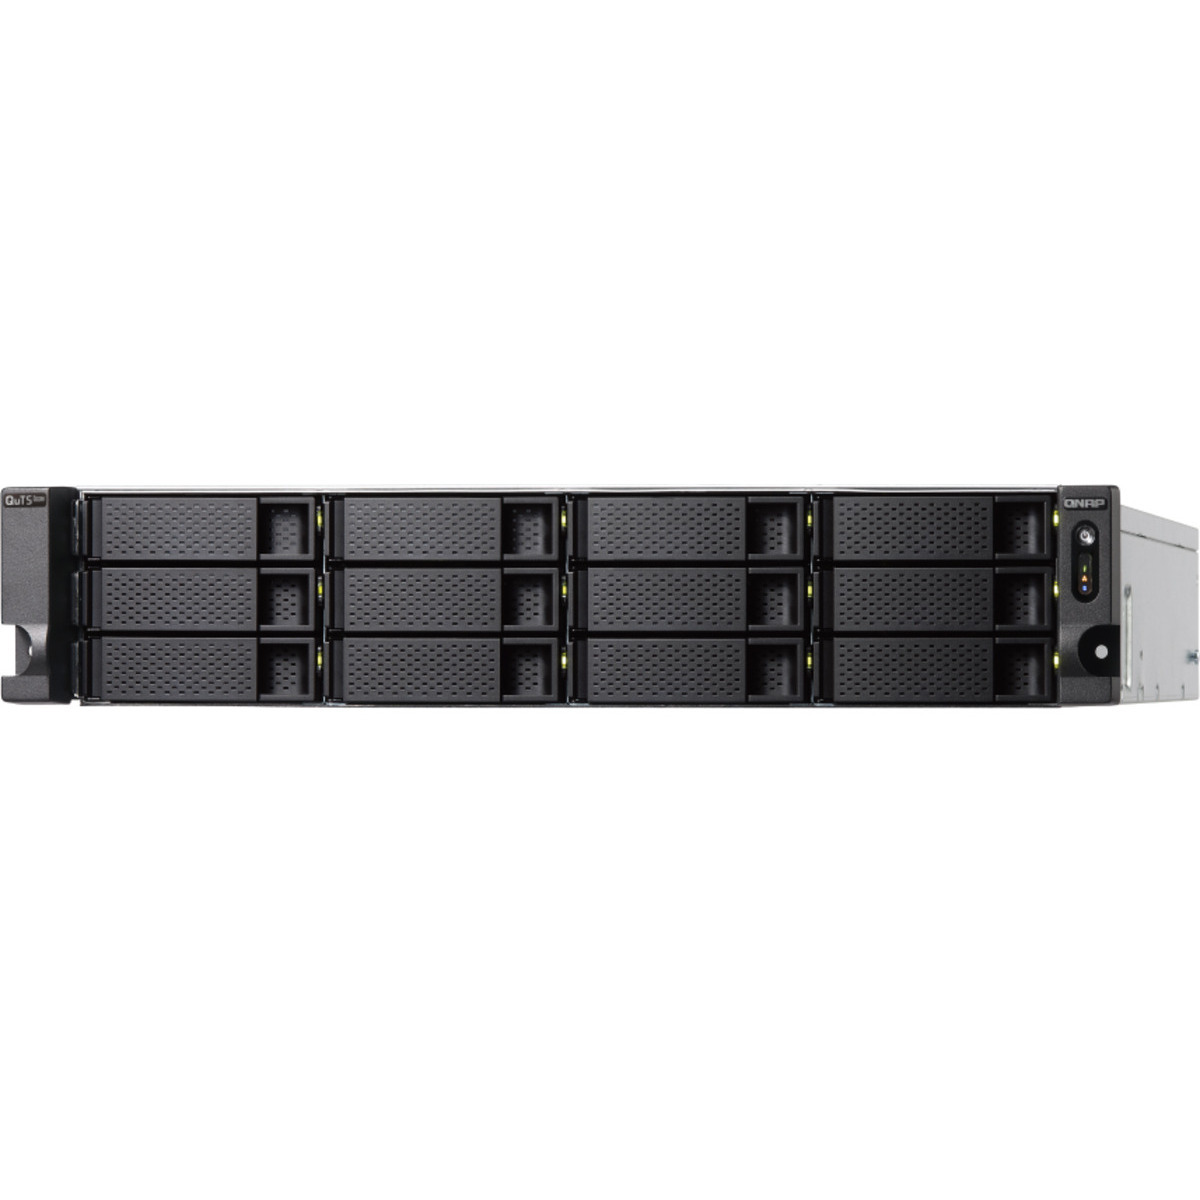 buy QNAP TS-h1886XU-RP R2 QuTS hero Edition 264tb RackMount NAS - Network Attached Storage Device 12x22000gb Seagate IronWolf Pro ST22000NT001 3.5 7200rpm SATA 6Gb/s HDD NAS Class Drives Installed - Burn-In Tested - nas headquarters buy network attached storage server device das new raid-5 free shipping simply usa TS-h1886XU-RP R2 QuTS hero Edition